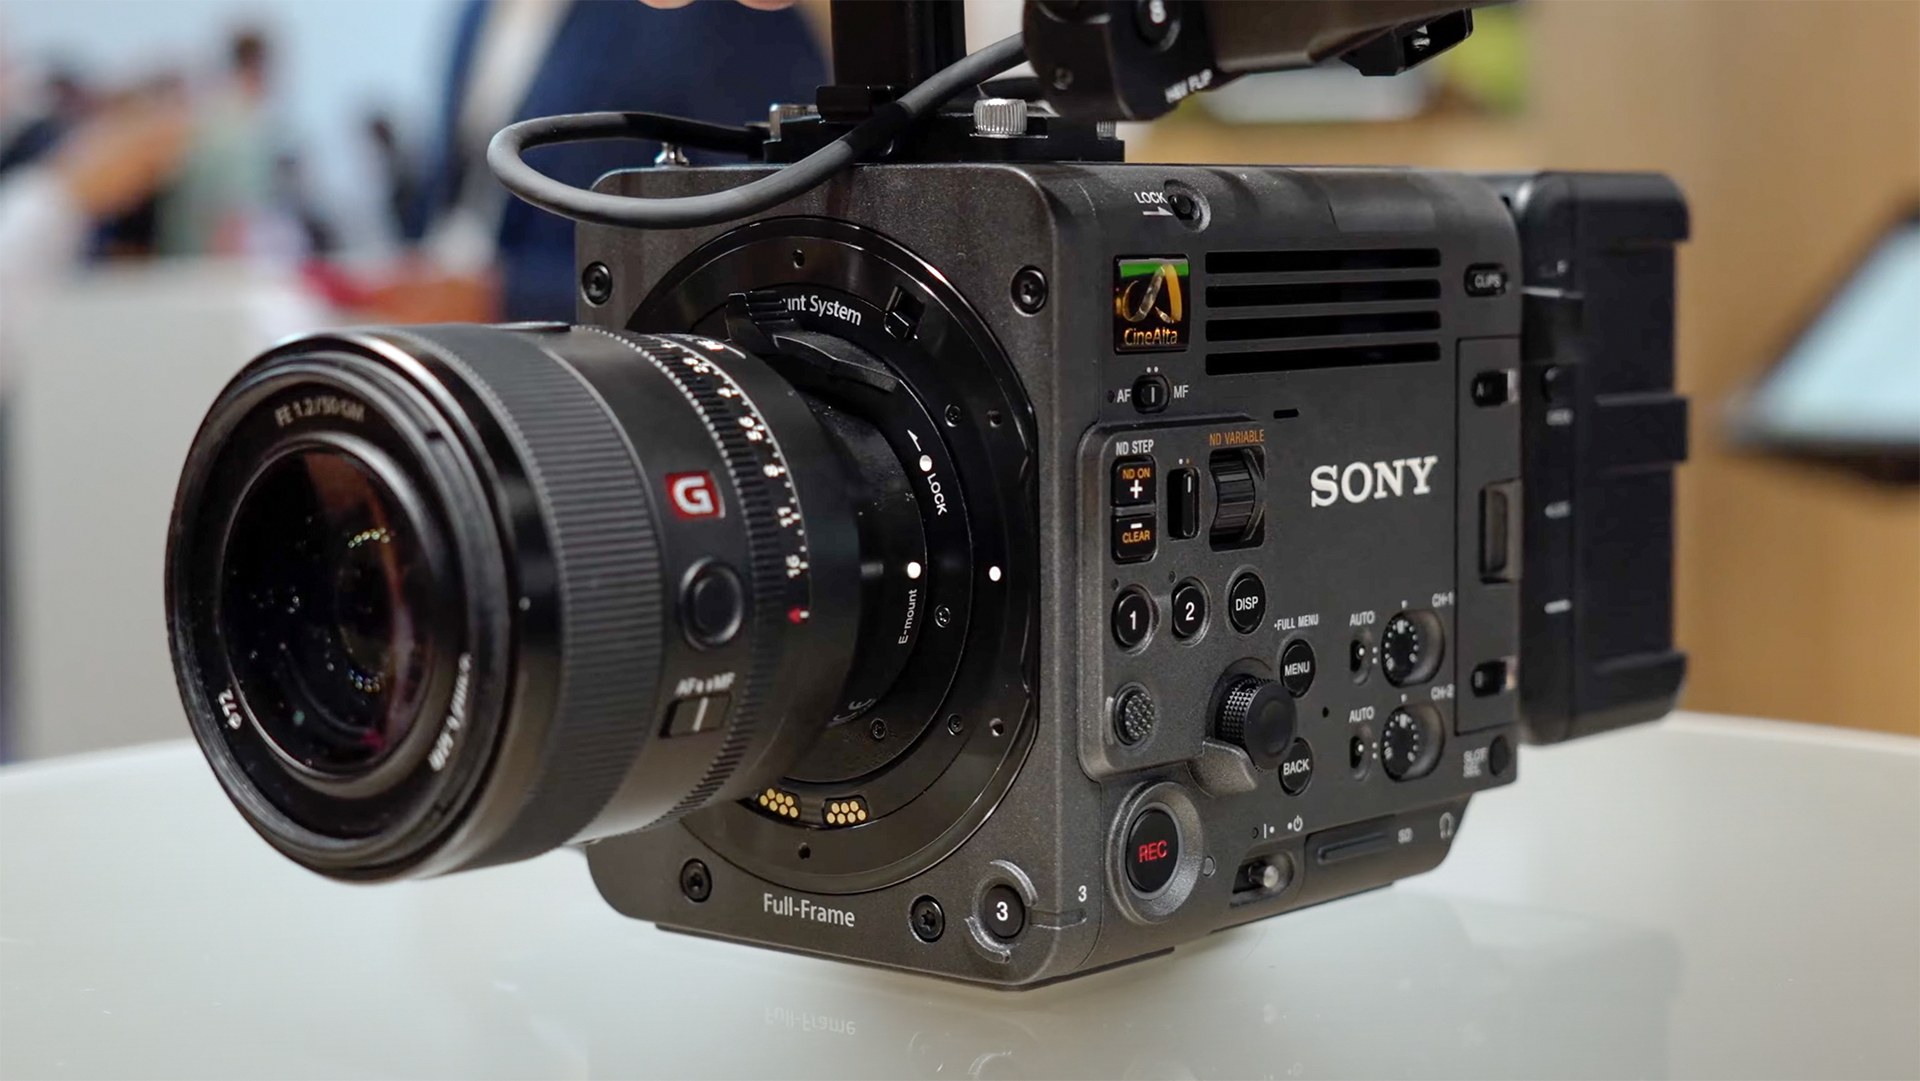 Sony's new lightweight Burano cinema camera features 8K video and